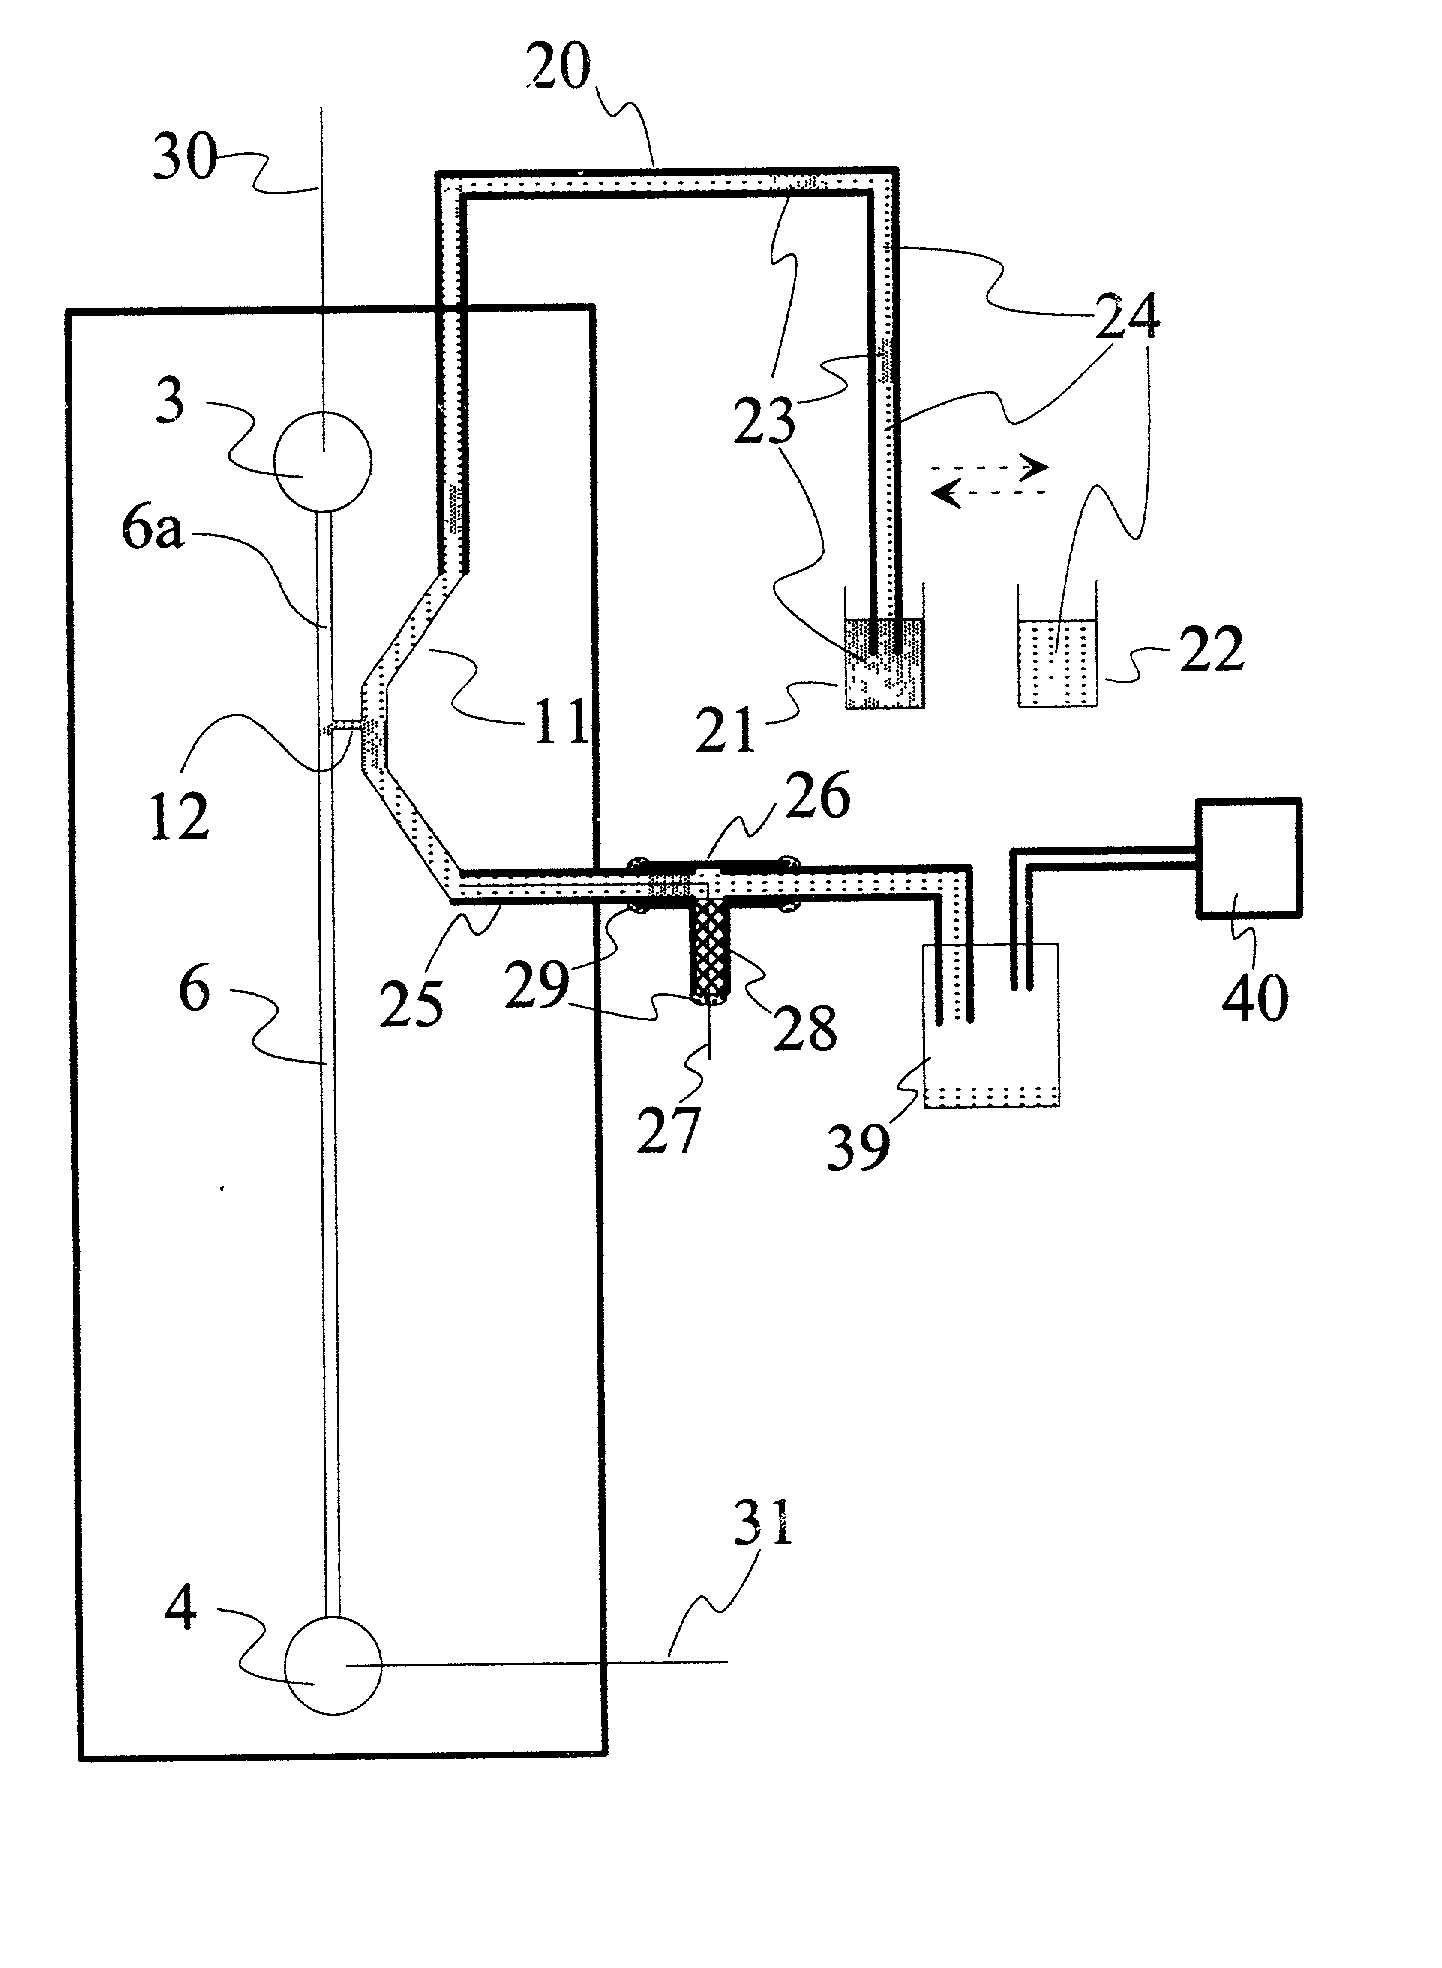 Method and apparatus for sample injection in microfabricated devices